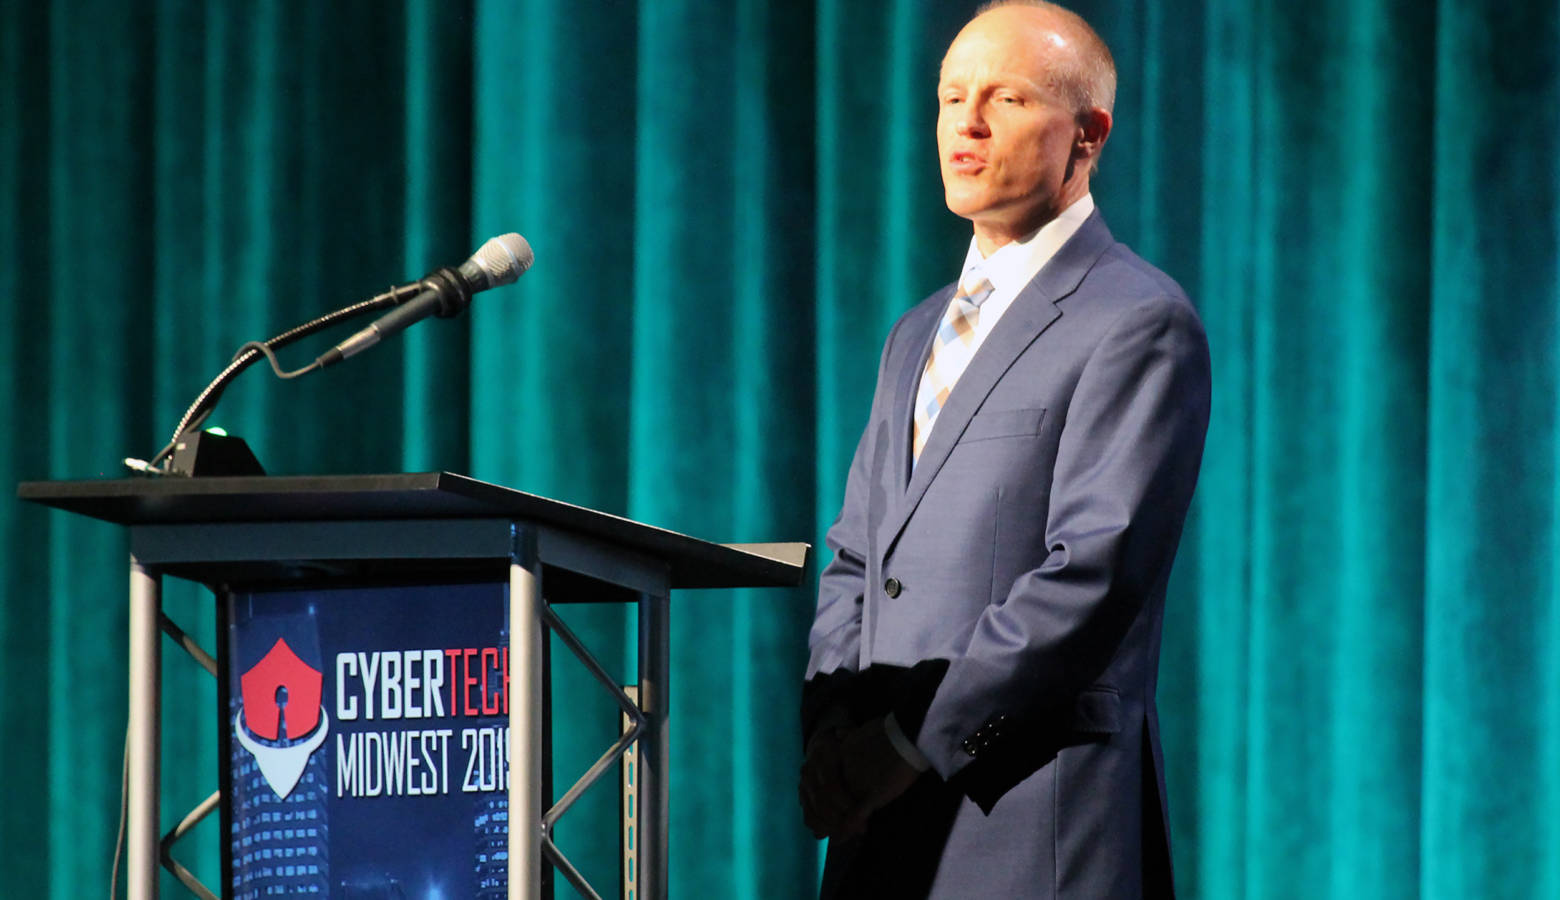 Rolls-Royce president of defense programs, Phil Burkholder, announces a new partnership with Purdue University to improve cybersecurity training at the Cybertech Midwest conference in Indianapolis. (Lauren Chapman/IPB News)